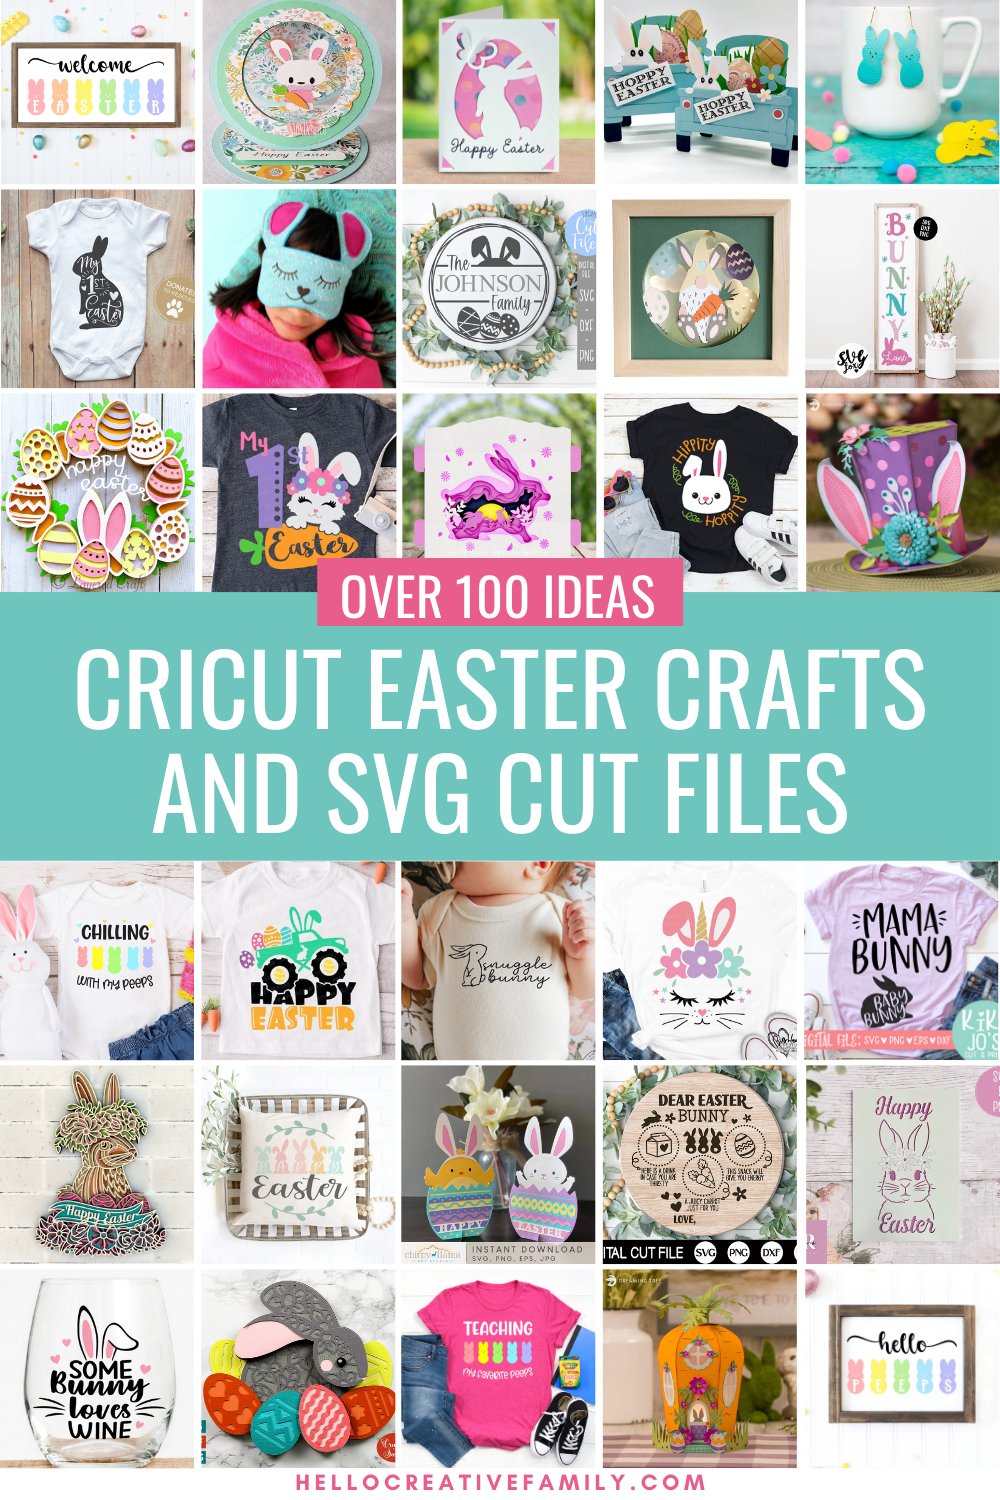 Spring is in the air and Easter is on the way! Enjoy this collection of over 100 Cricut Easter ideas that you can cut using your Cricut machine! From Easter shirts, to DIY home decor, to Easter Cards, and Easter basket stuffer ideas! Plus SVG files to make them!